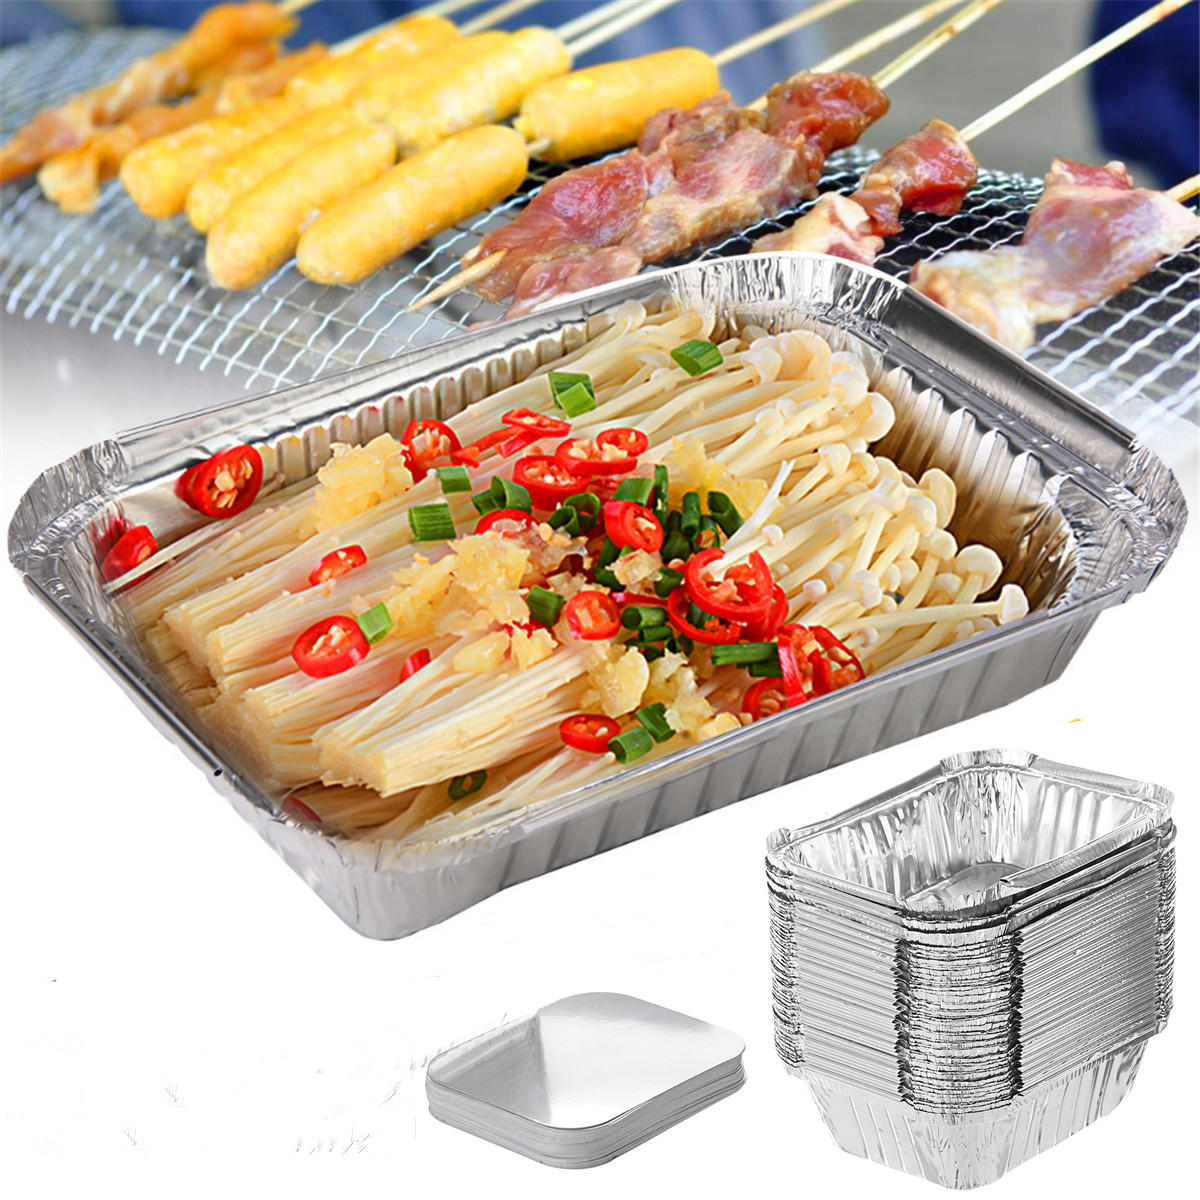 50PCS Aluminum Foil Trays BBQ Disposable BBQ Mat Food Container Baking Pan With Lids